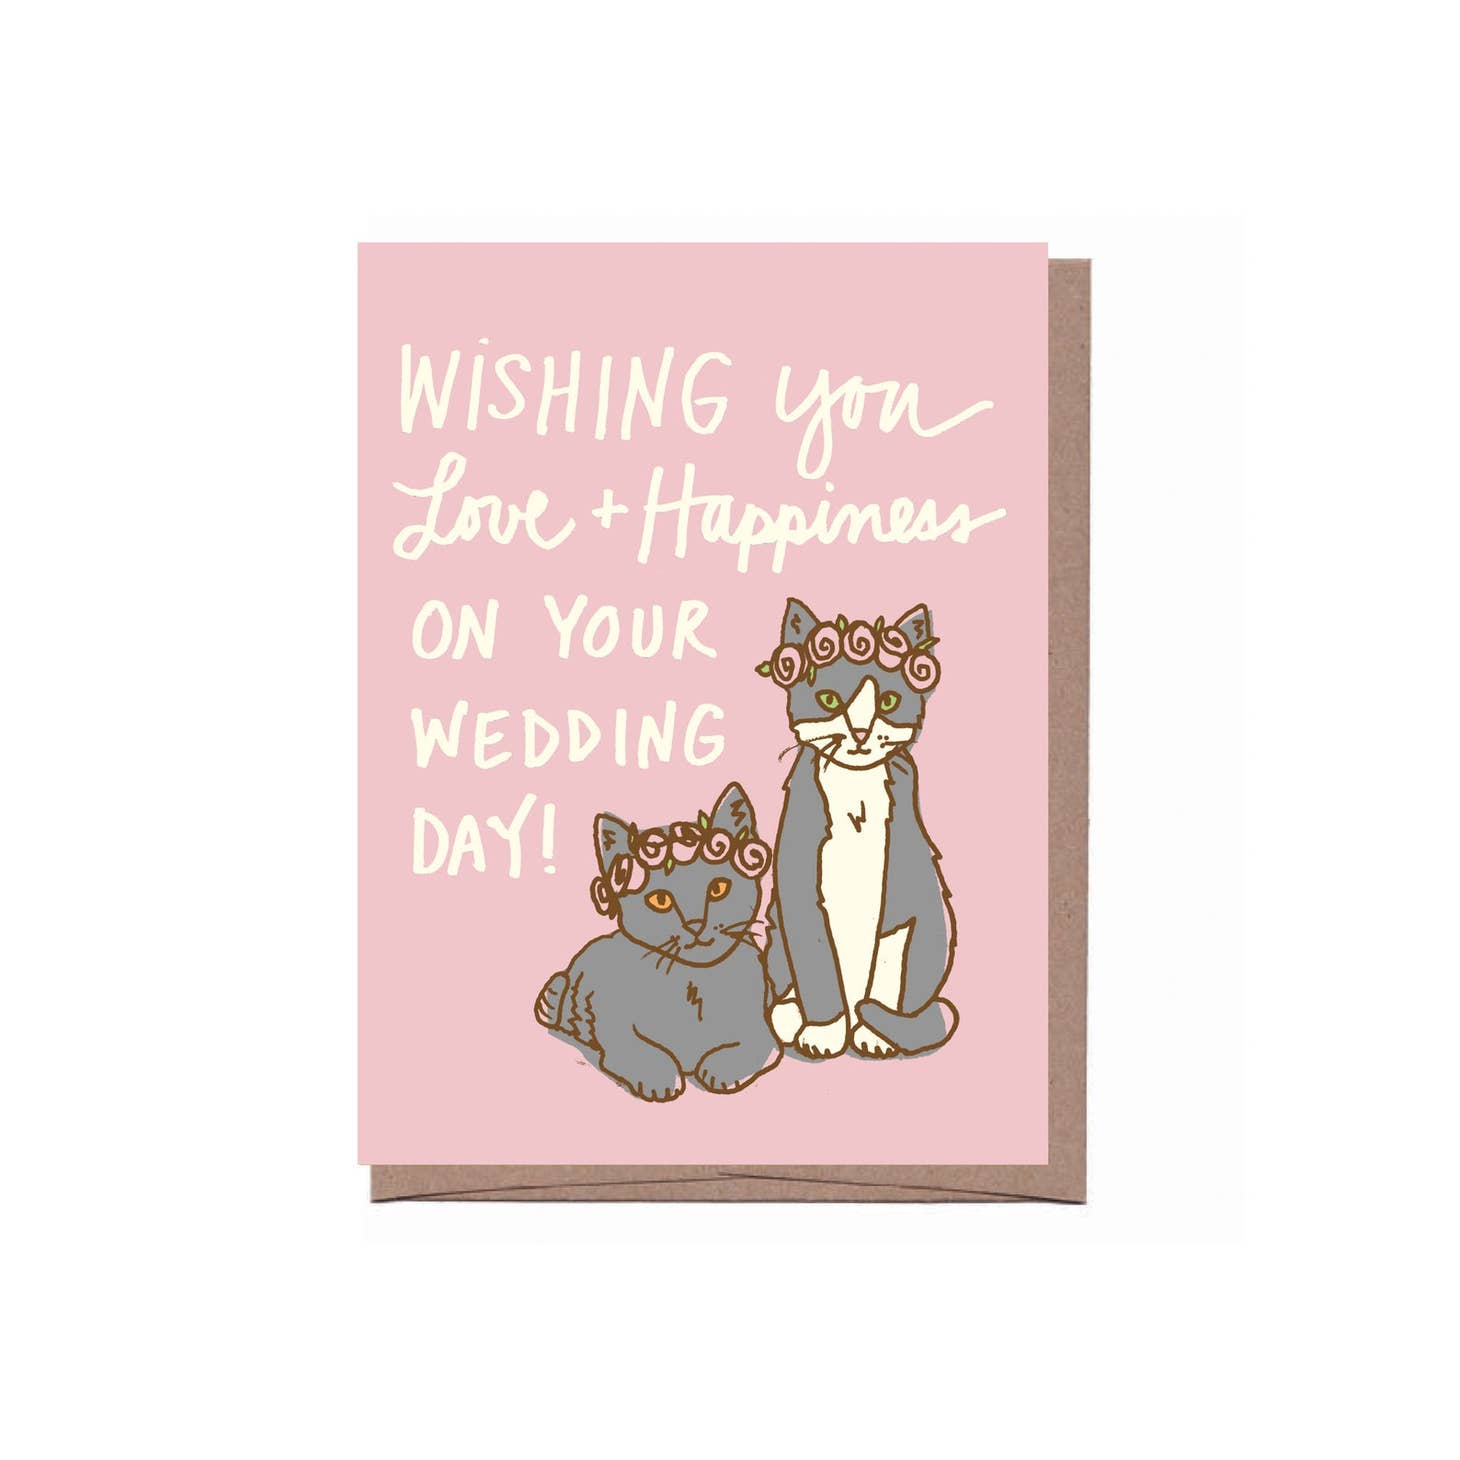 Greeting card depicting 2 grey cats wearing pink flower crowns. Text says "Wishing you love and happiness on your wedding day"